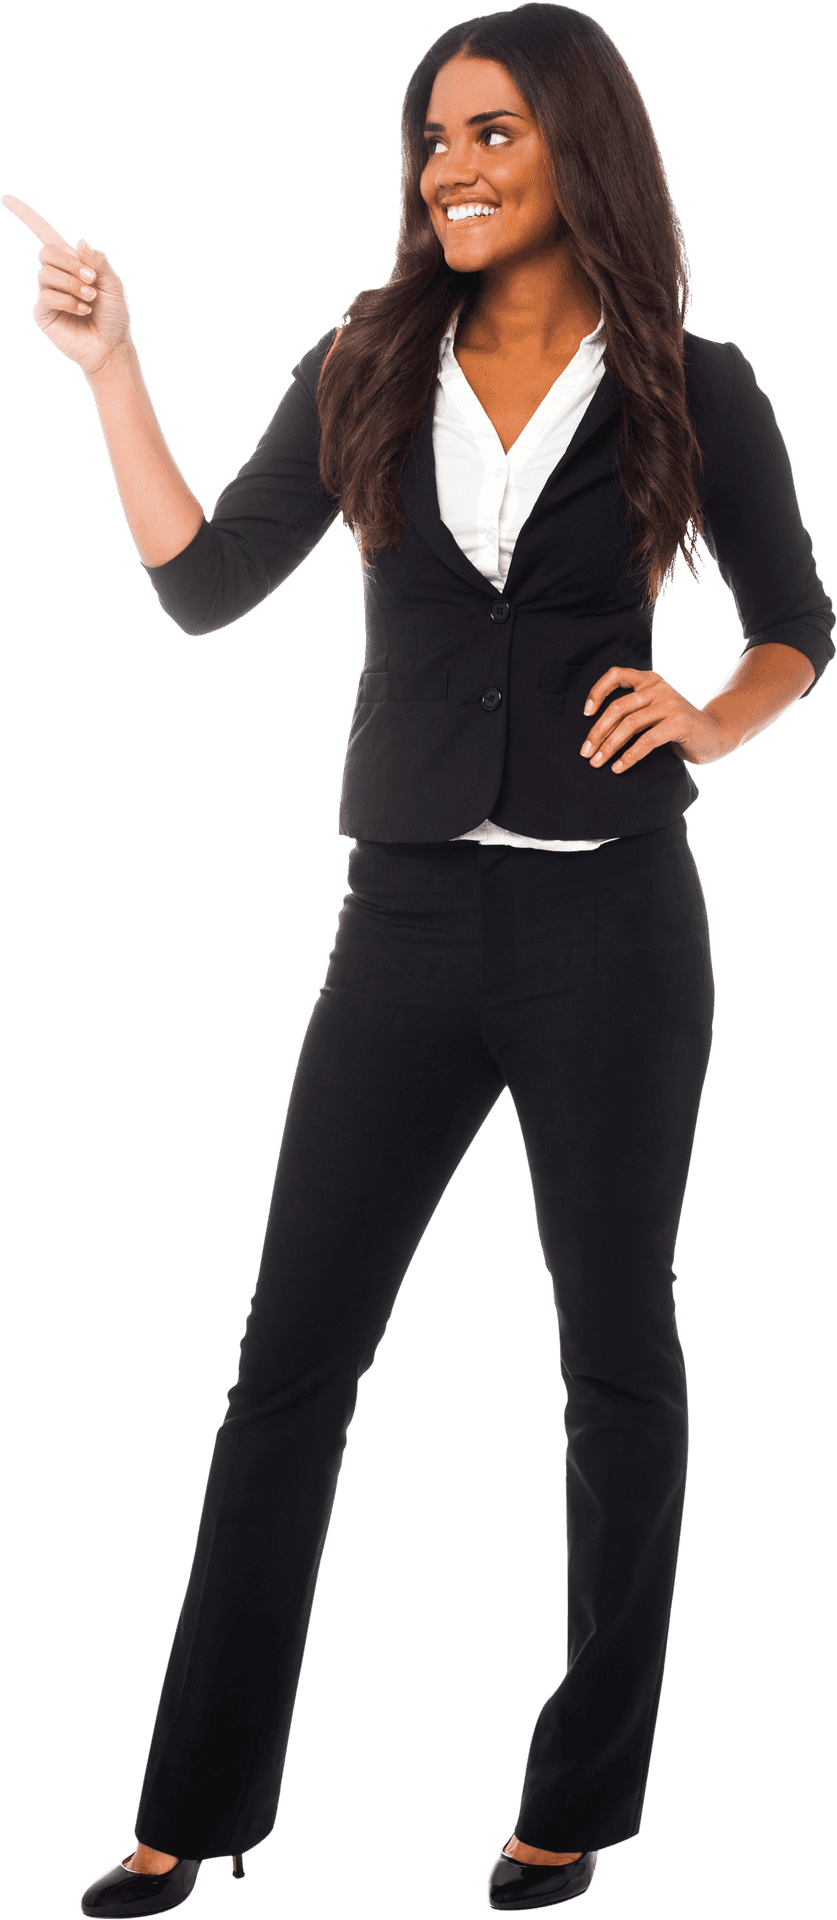 Confident Businesswoman Pointing Upward PNG image